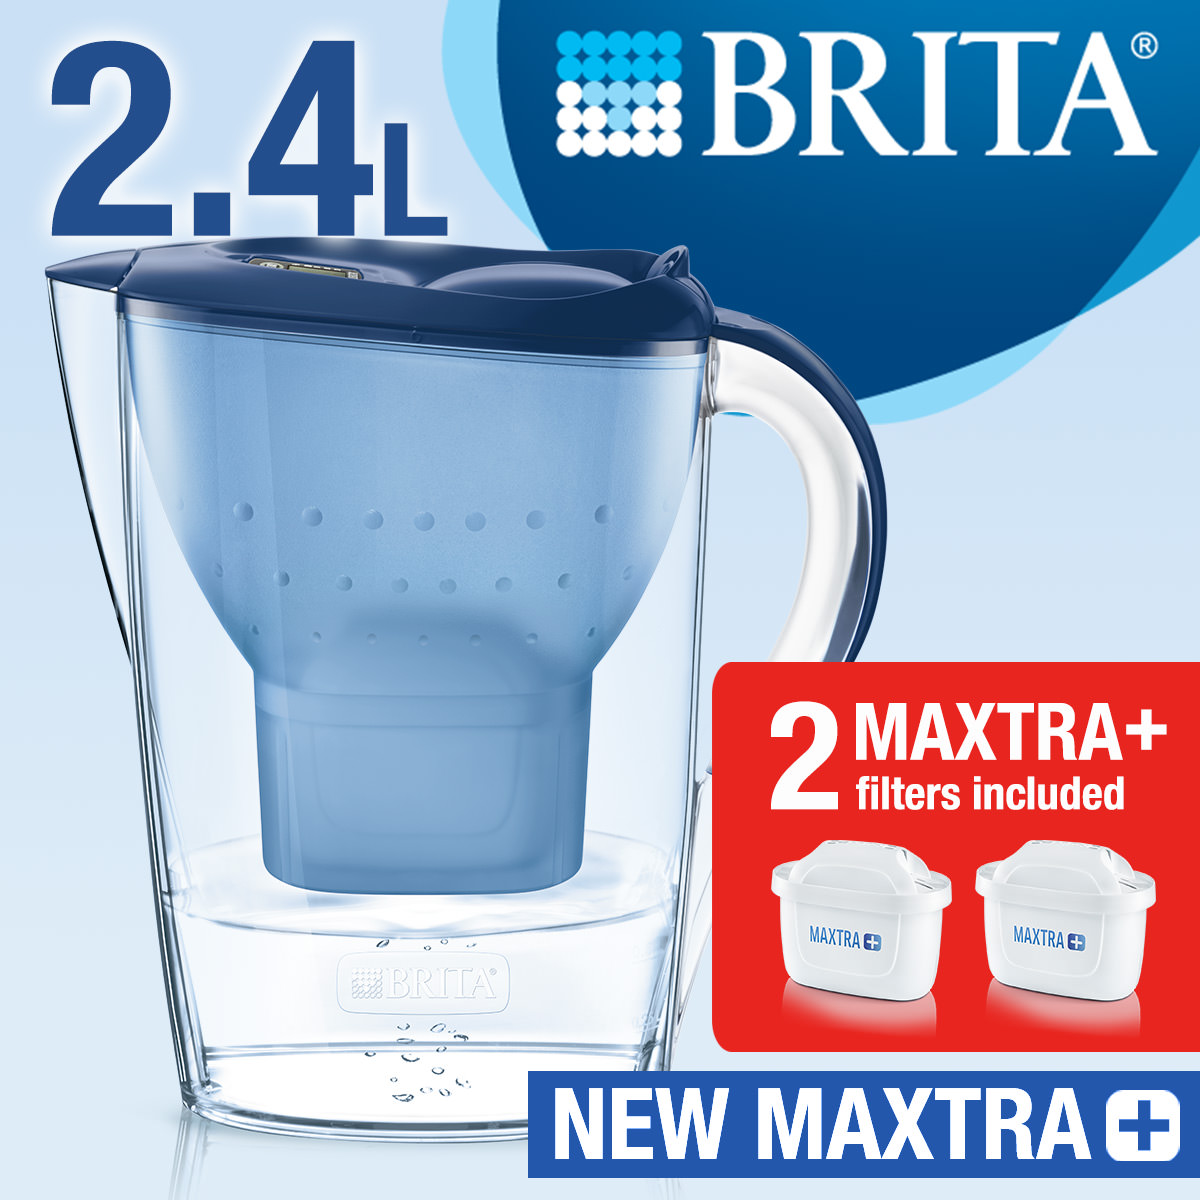 BRITA Marella XL German Made Water Filter Jug 3.5 L Blue, Powerful  Filtration with MicroFlow Technology